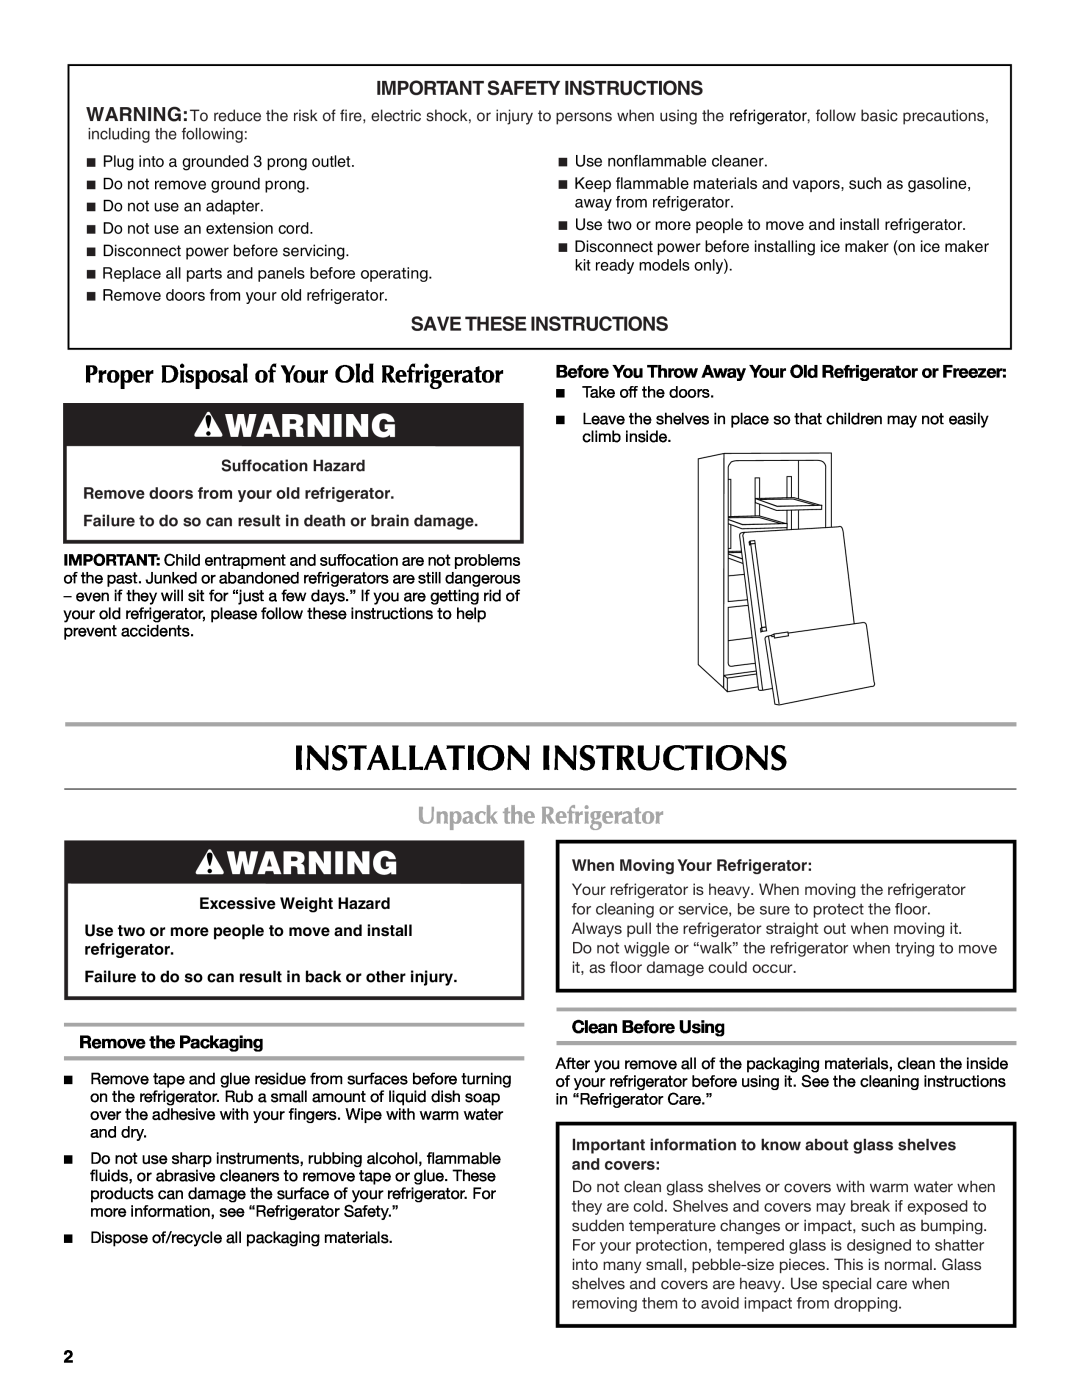 Maytag MBL2556KES Installation Instructions, Unpack the Refrigerator, Important Safety Instructions, Remove the Packaging 